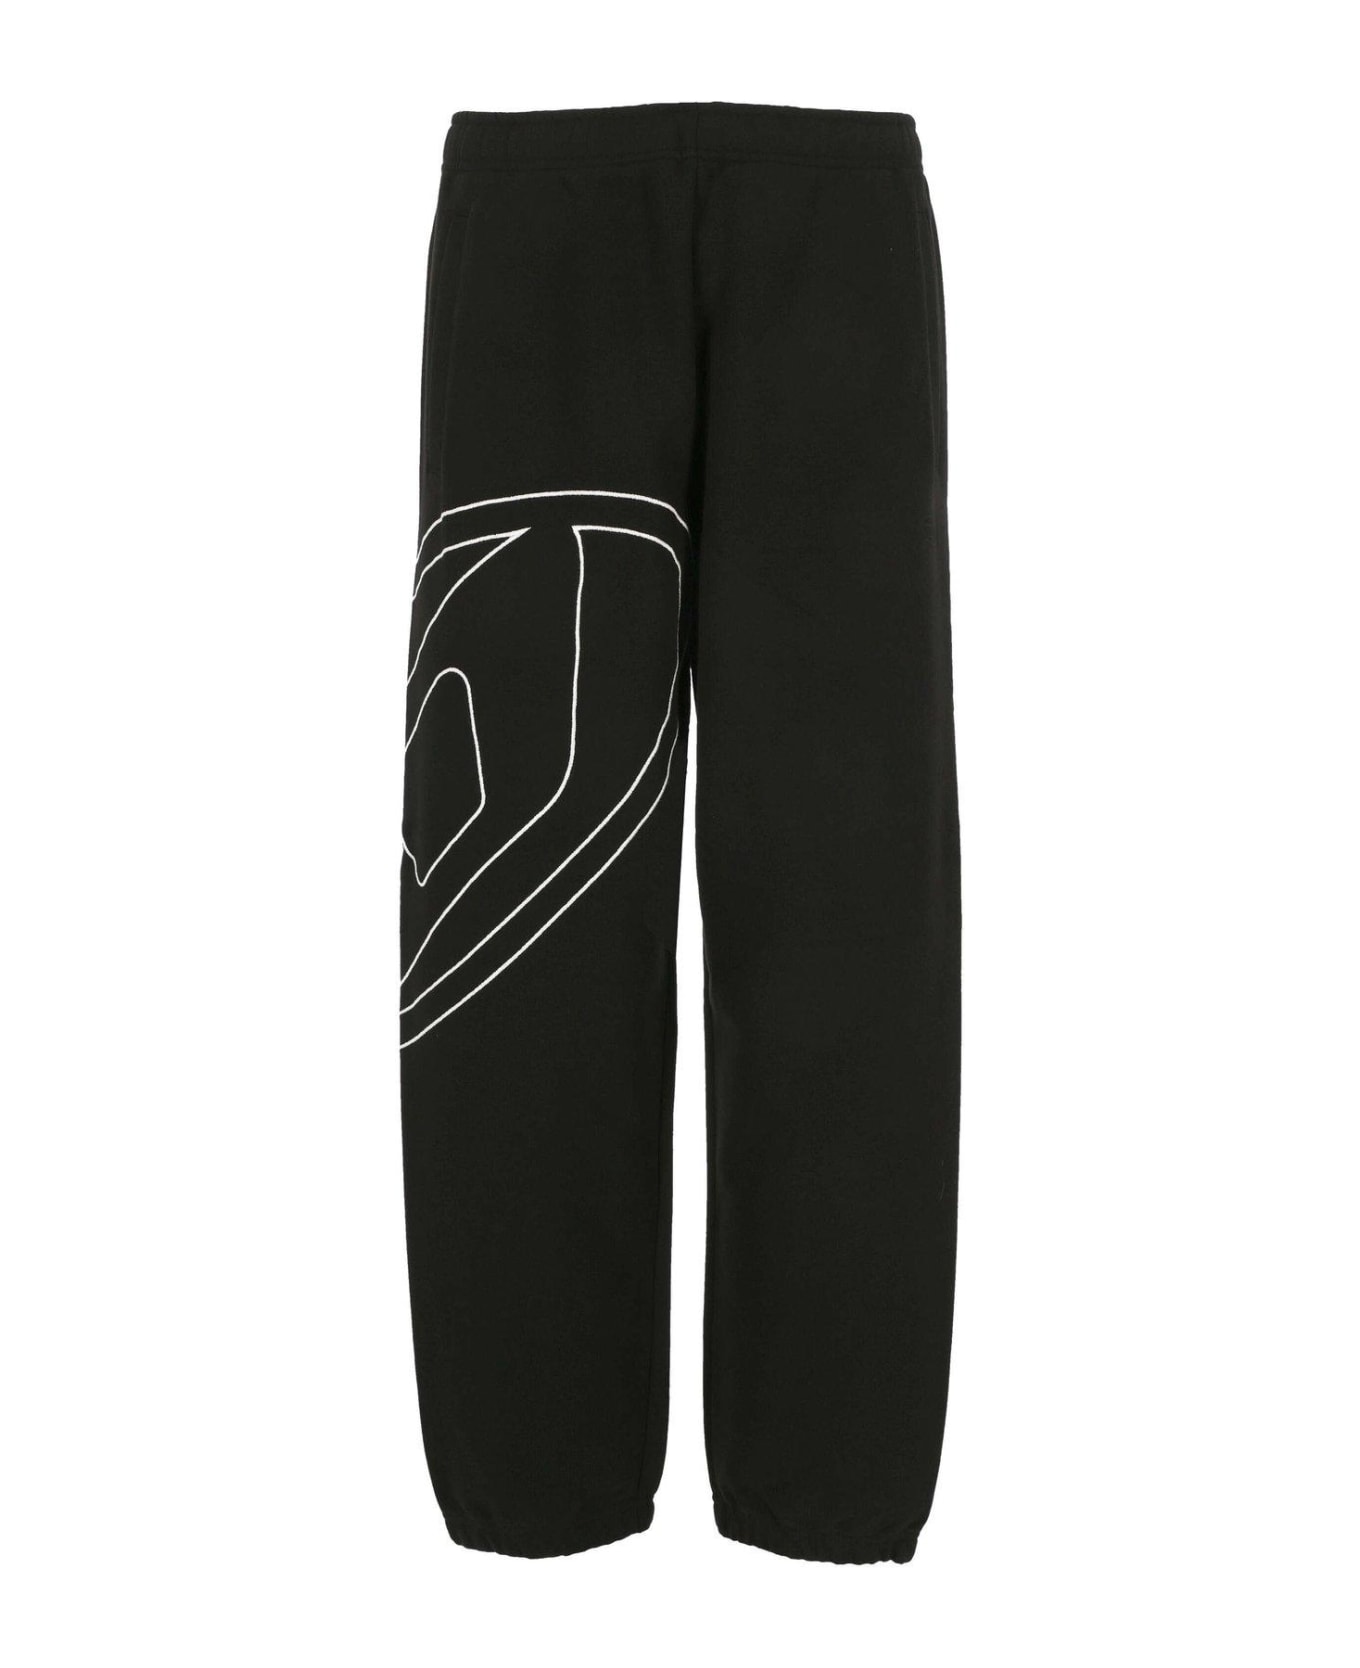 Diesel Oval-d Logo Embroidered Track Pants - Nero スウェットパンツ